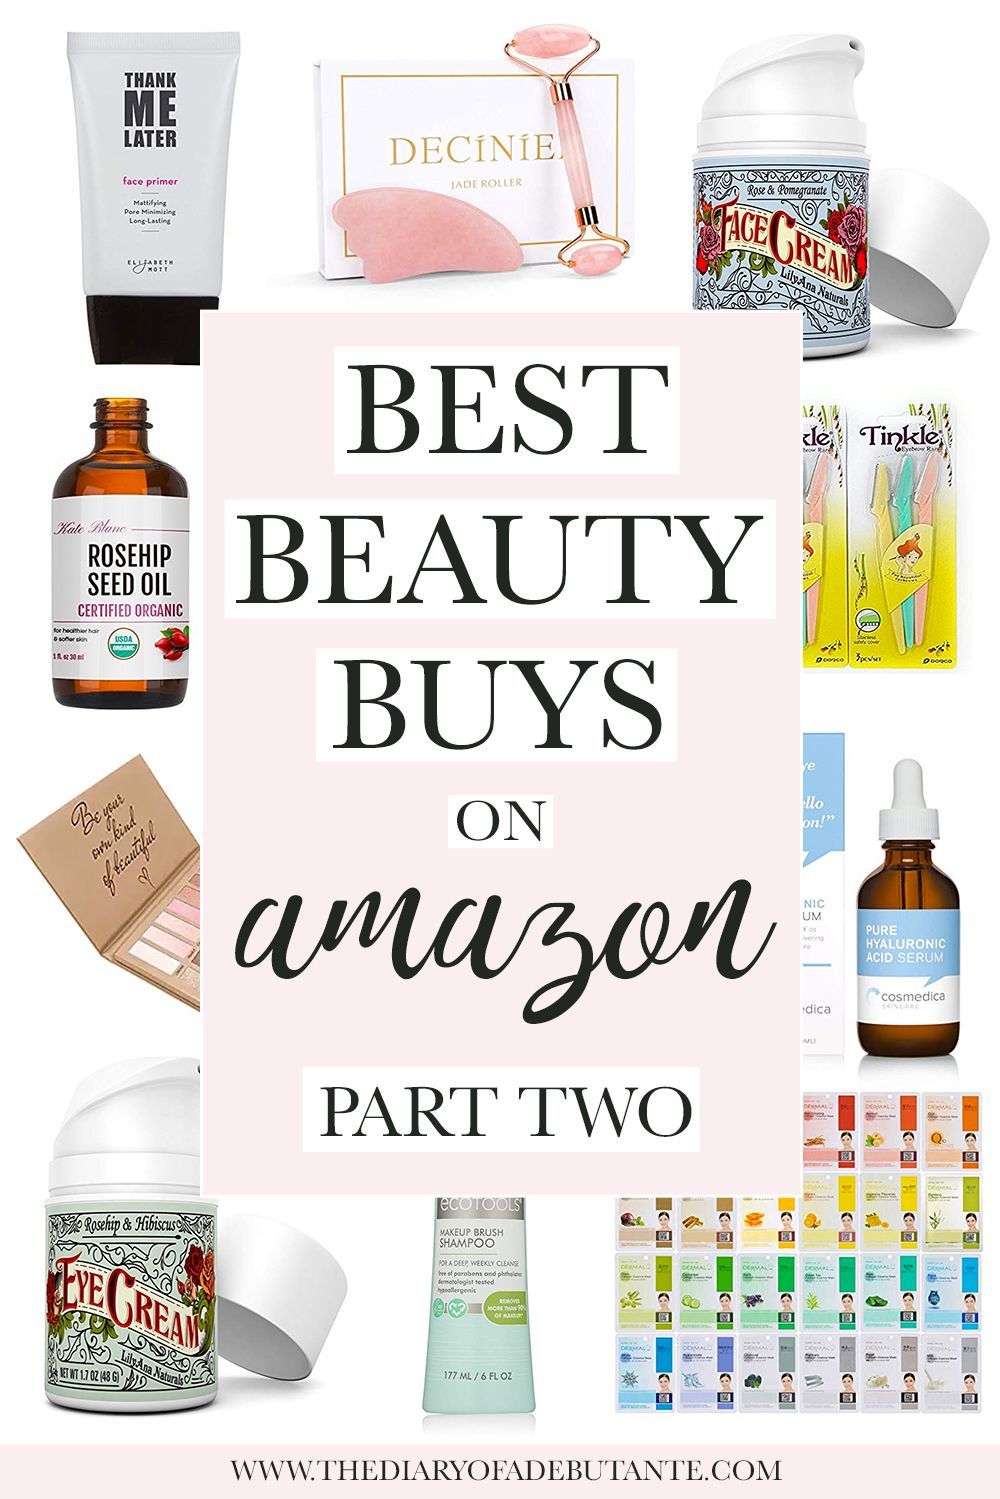 12 of the Best Beauty Products on Amazon: 2019 Edition - 12 of the Best Beauty Products on Amazon: 2019 Edition -   15 beauty Products online ideas